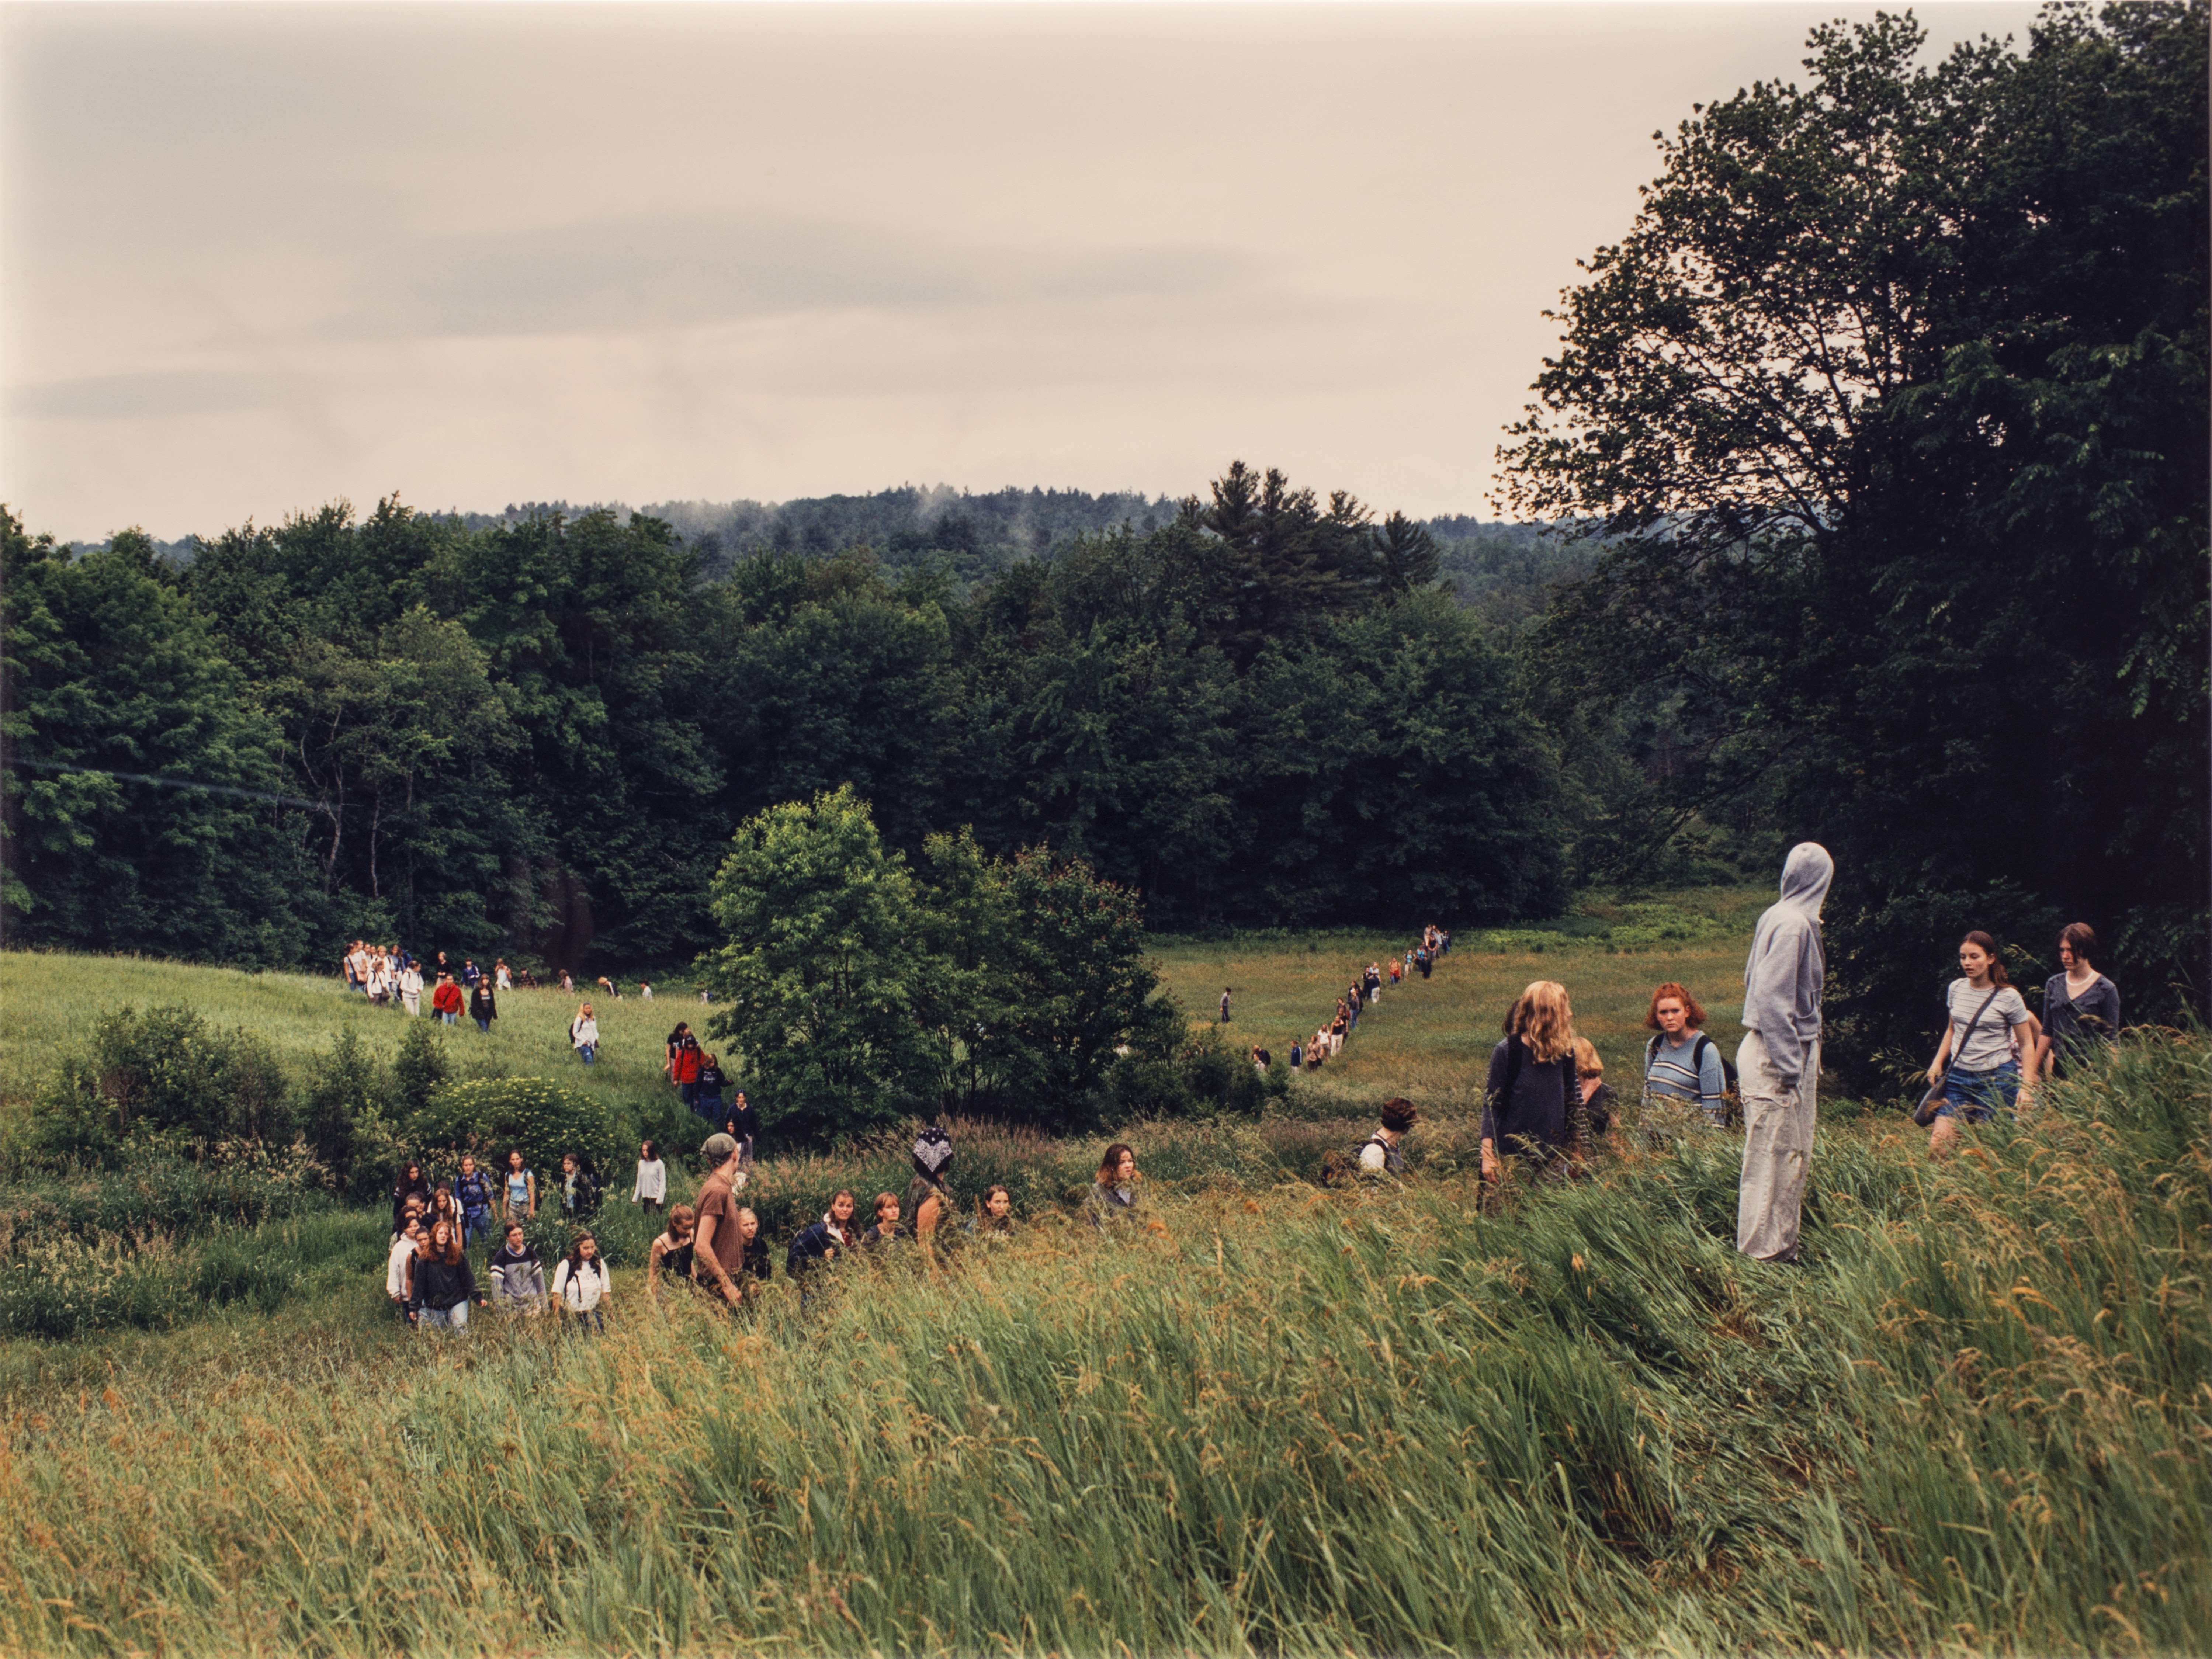 A landscape photograph featuring a field of tall green grass surrounded by leafy trees and a grey sky. A large group of people of varying ages traverse the field on foot. In the background the people form two lines, and a smaller group is congregated in the foreground.